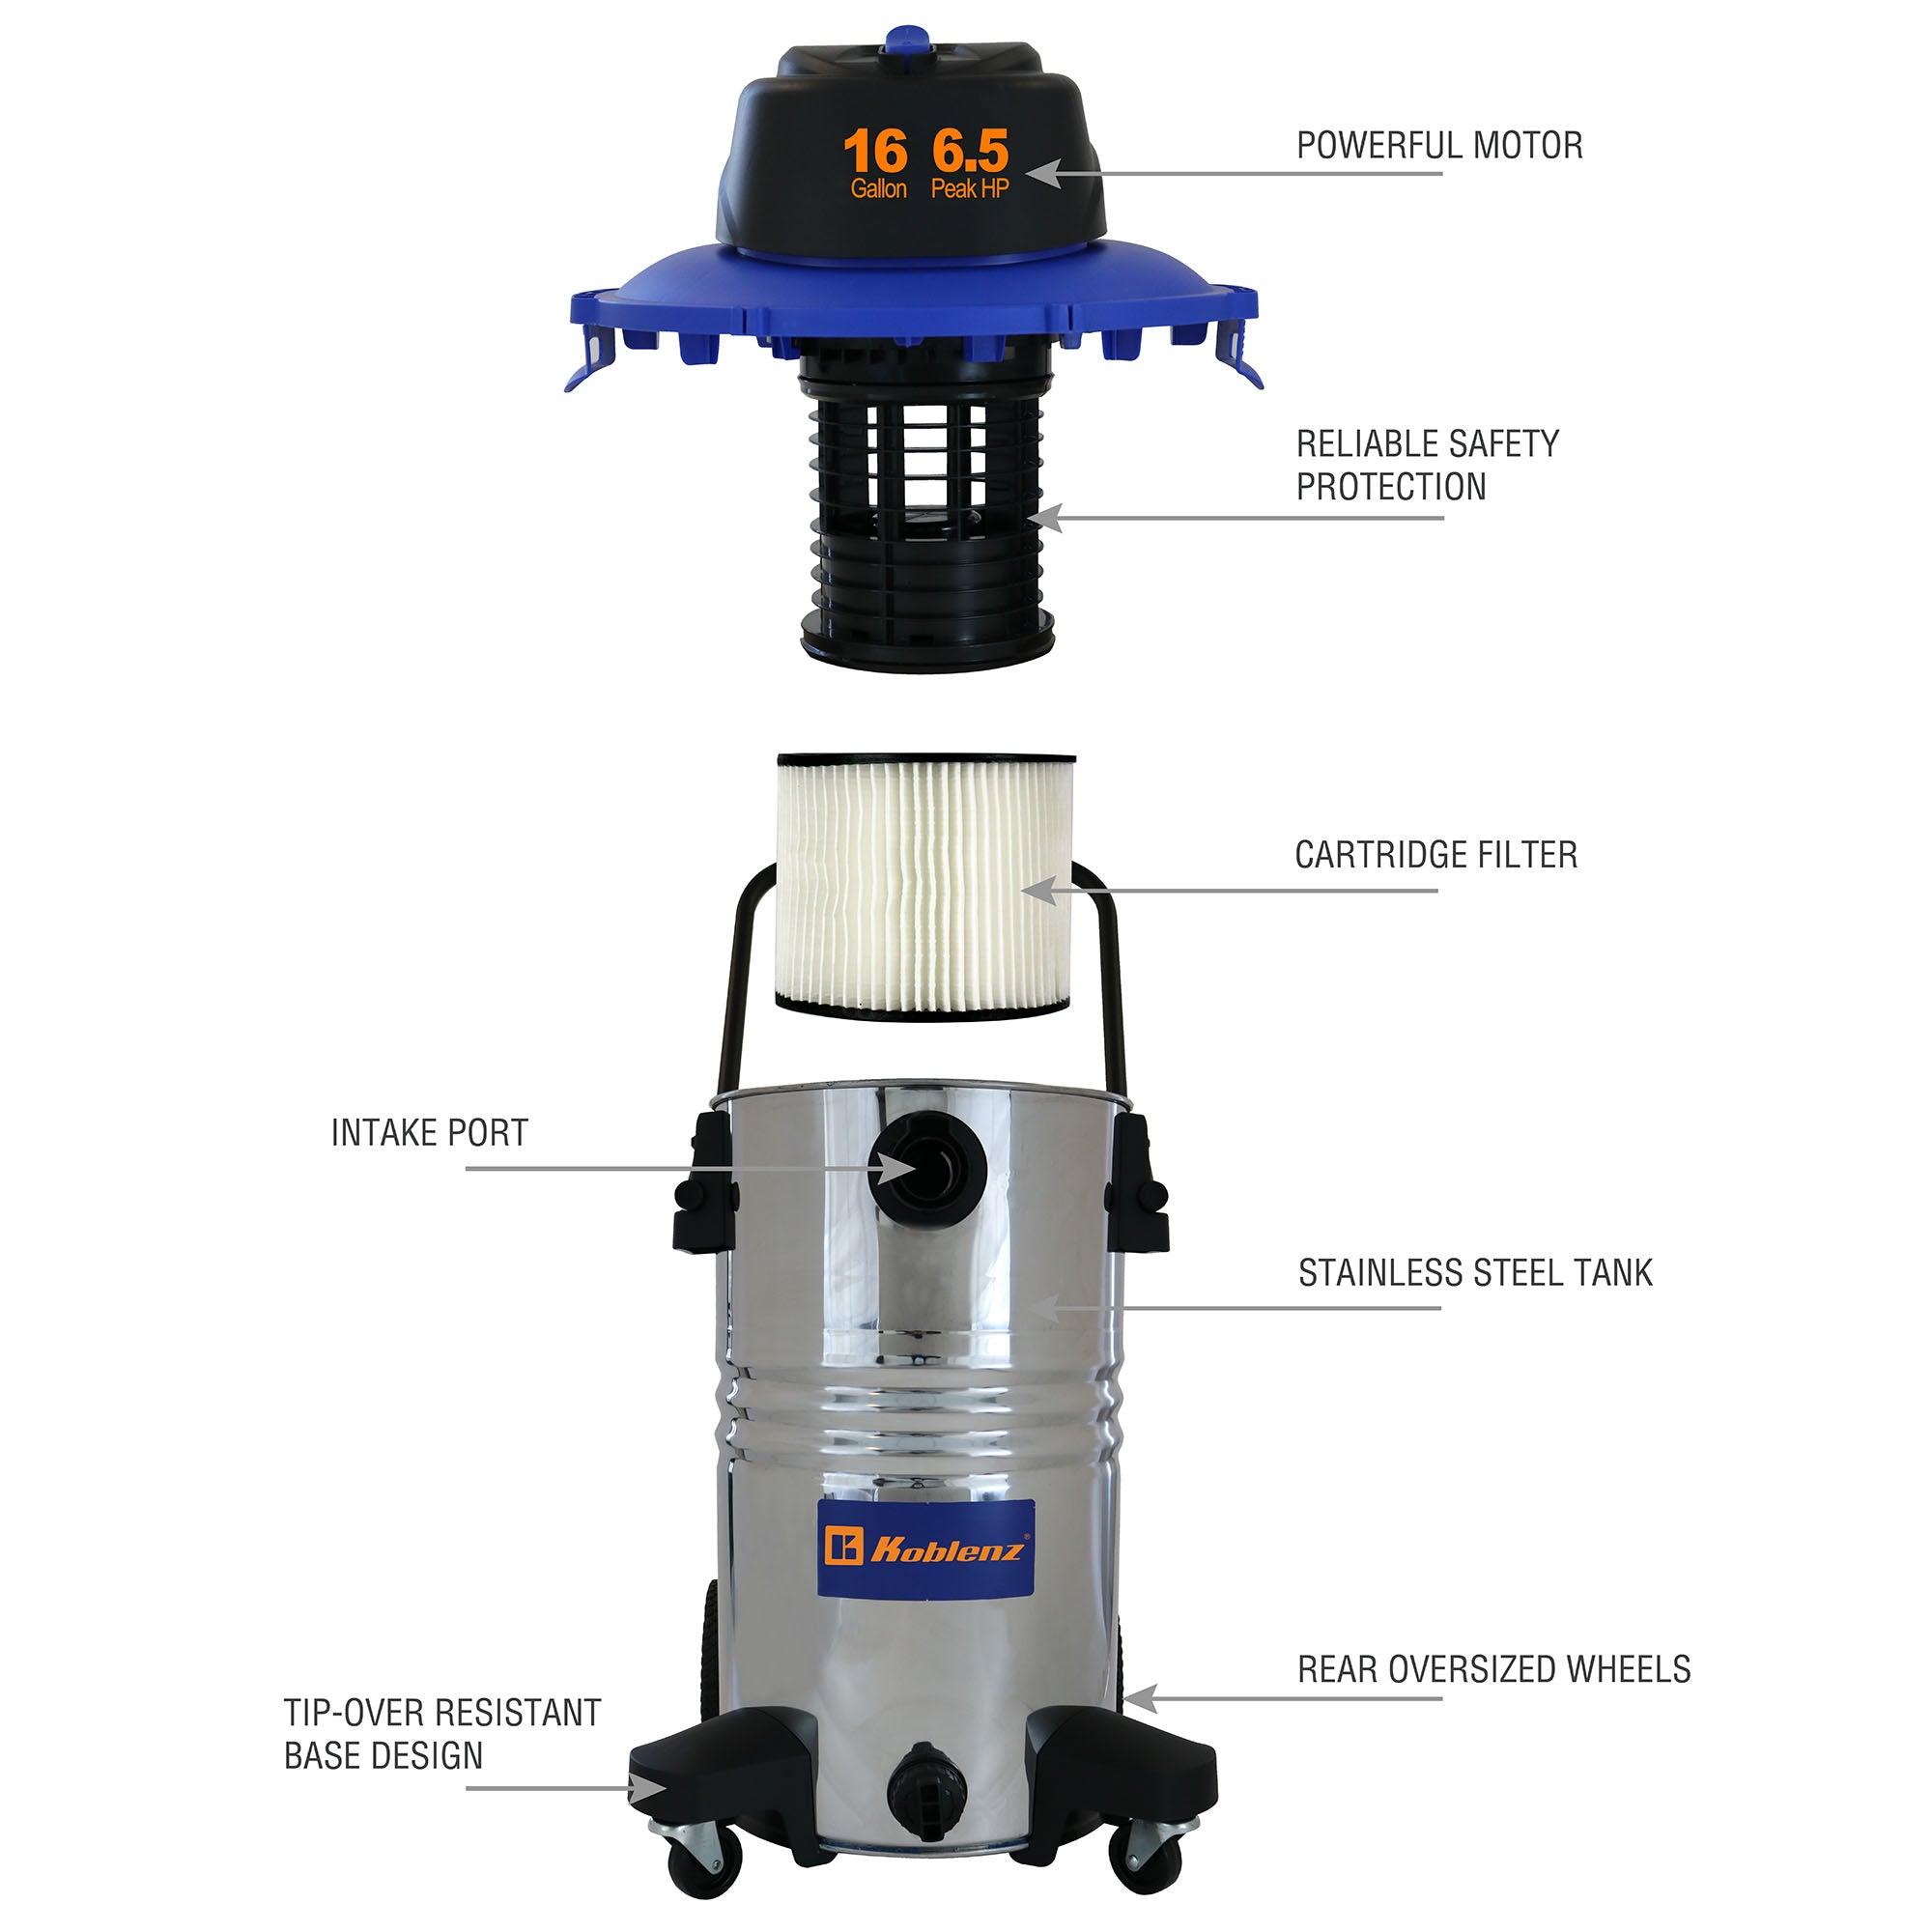 16 Gallon 6.5 PHP Stainless Steel Wet Dry Vacuum WD-16 L314 SSH